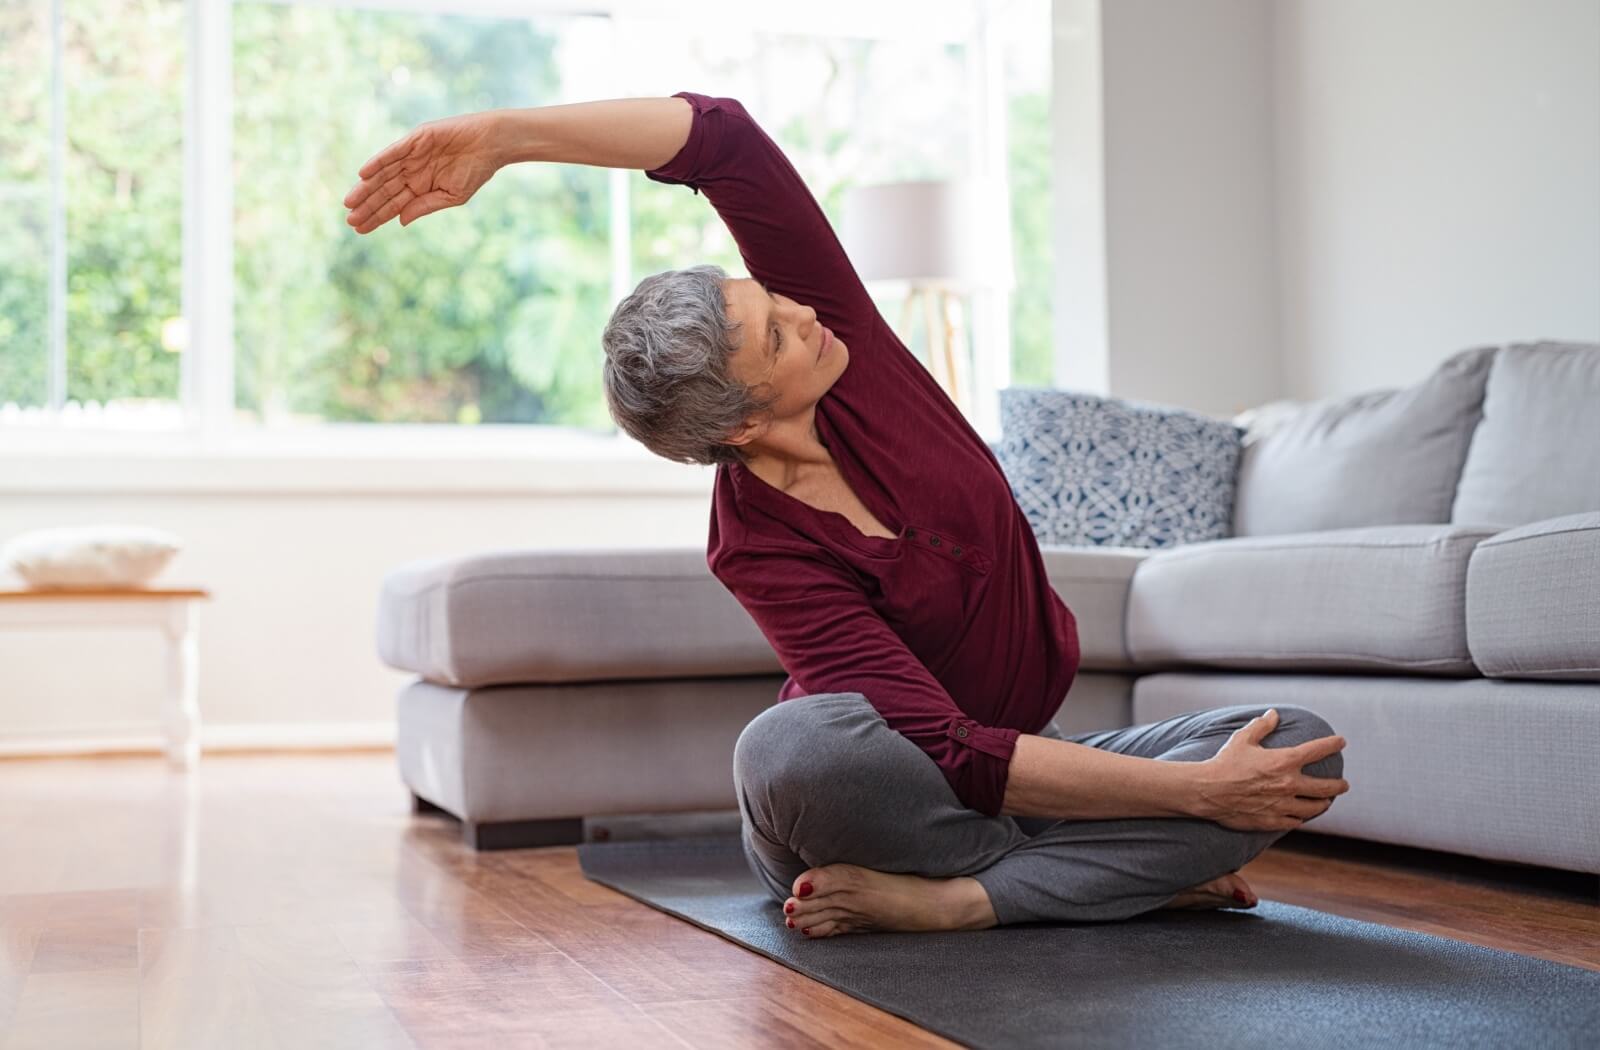 An older adult woman stretching while sitting on an exercise mat.